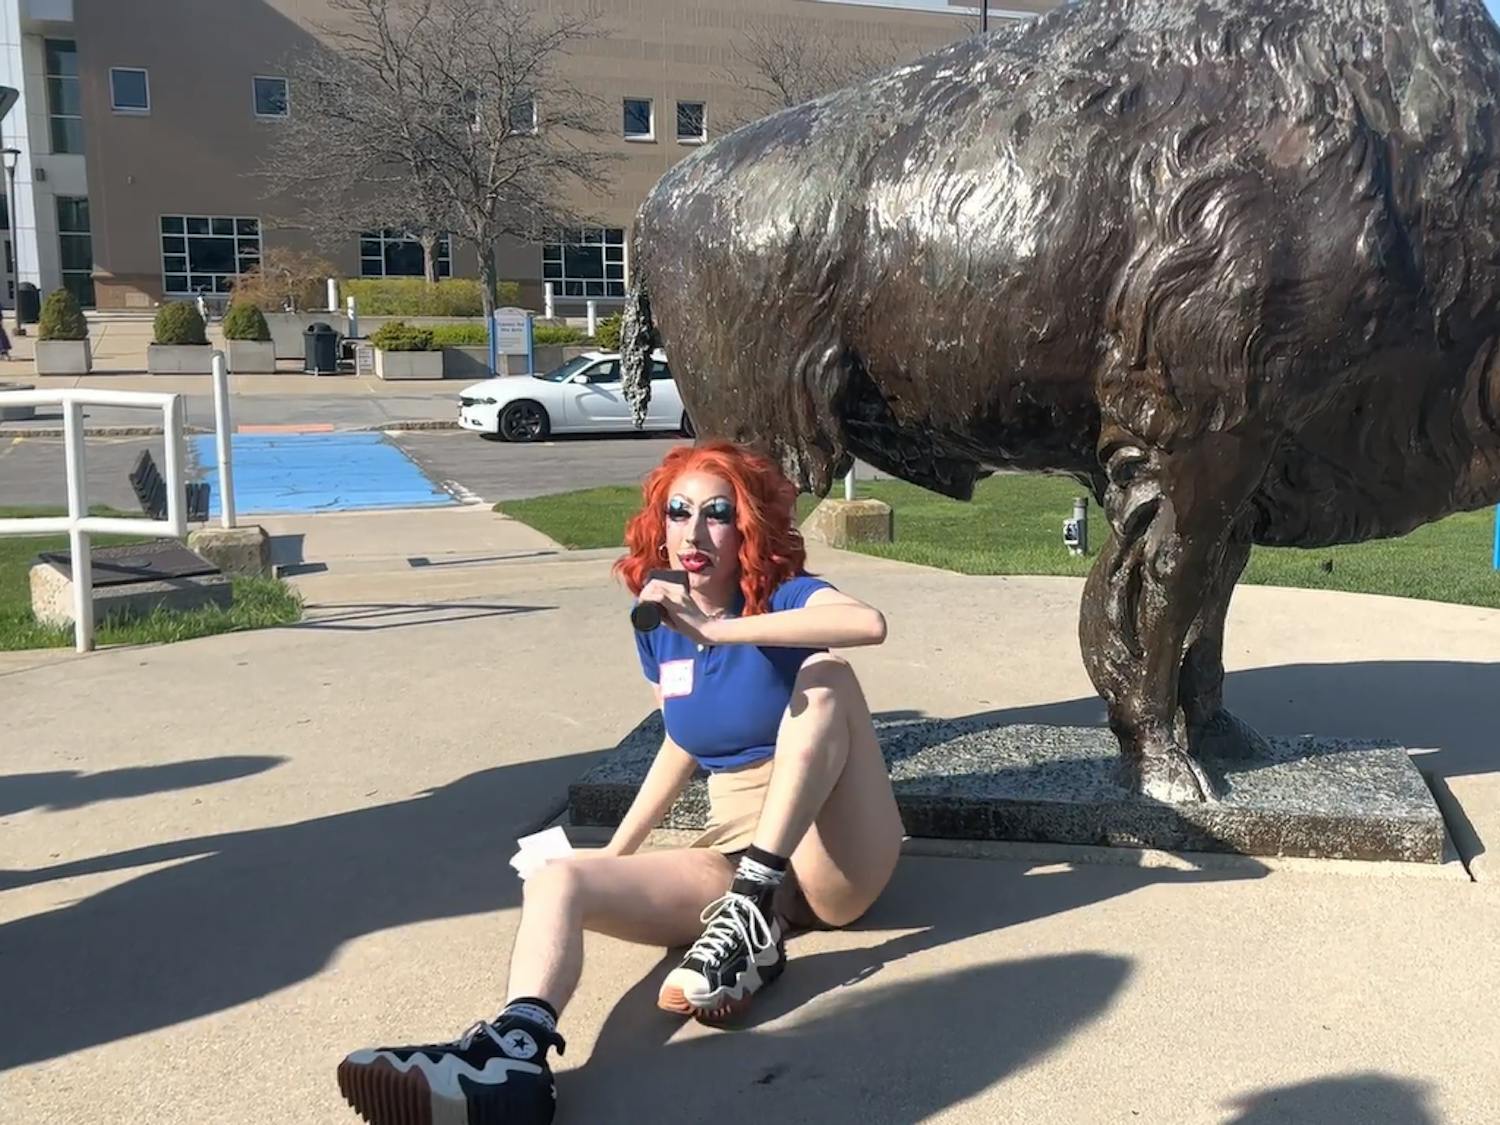 Mx. Ology demonstrated an invented UB tradition on their tour: rubbing the bull’s penis to ensure a timely graduation.&nbsp;